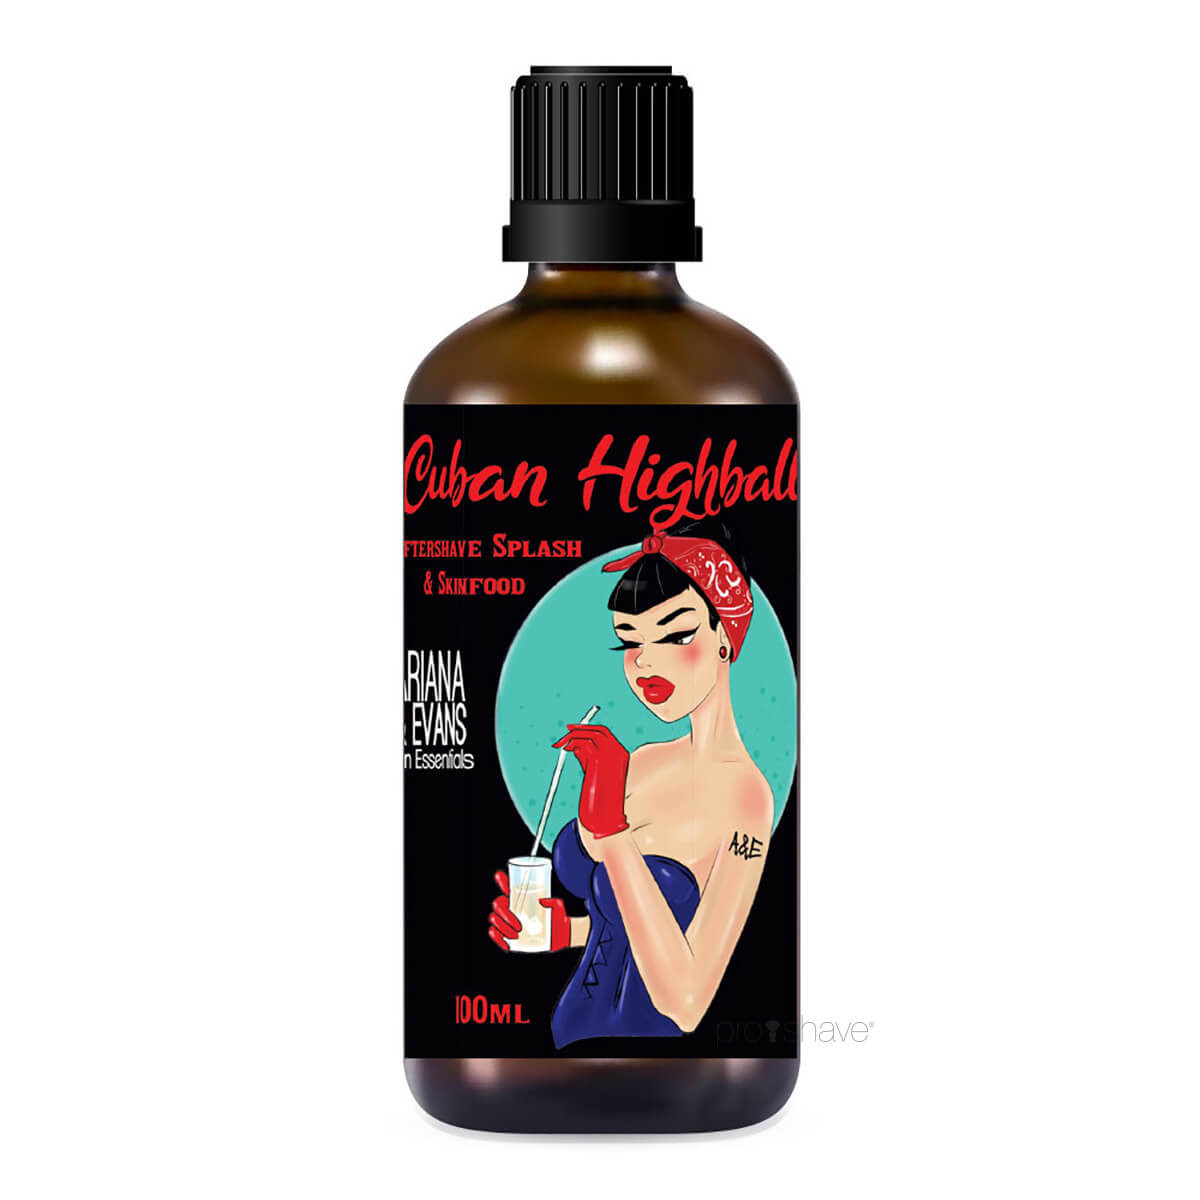 Ariana & Evans Aftershave, Cuban Highball, 100 ml.